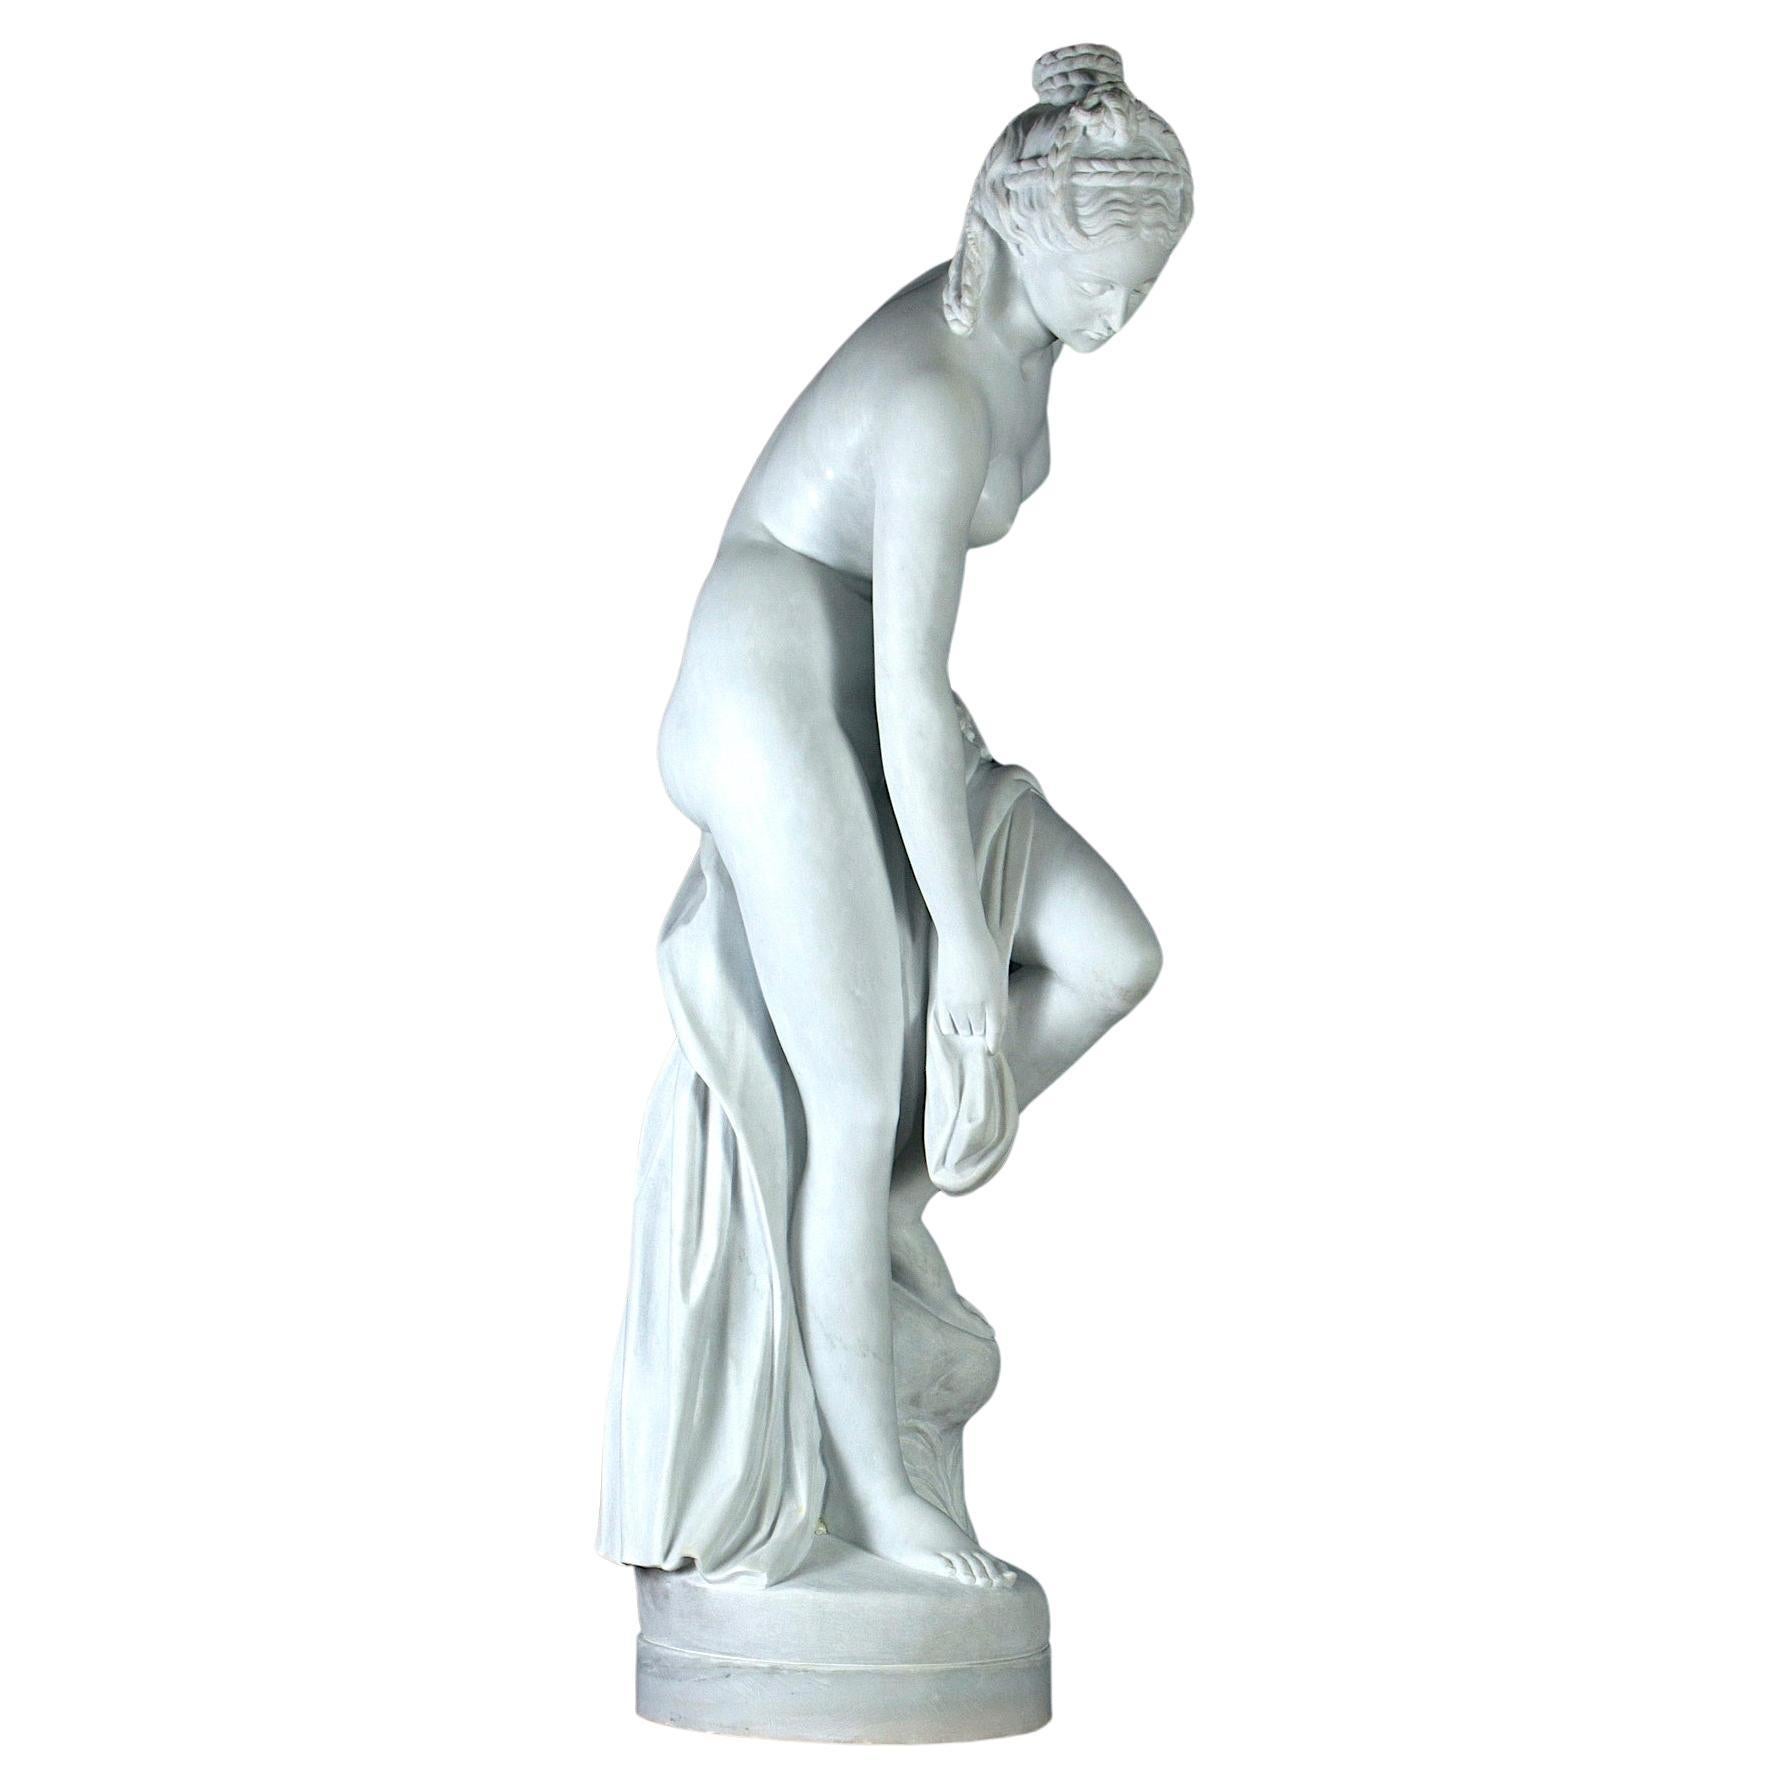  Fabulous French Neoclassical Marble Sculpture of Bathing Venus 1880' For Sale